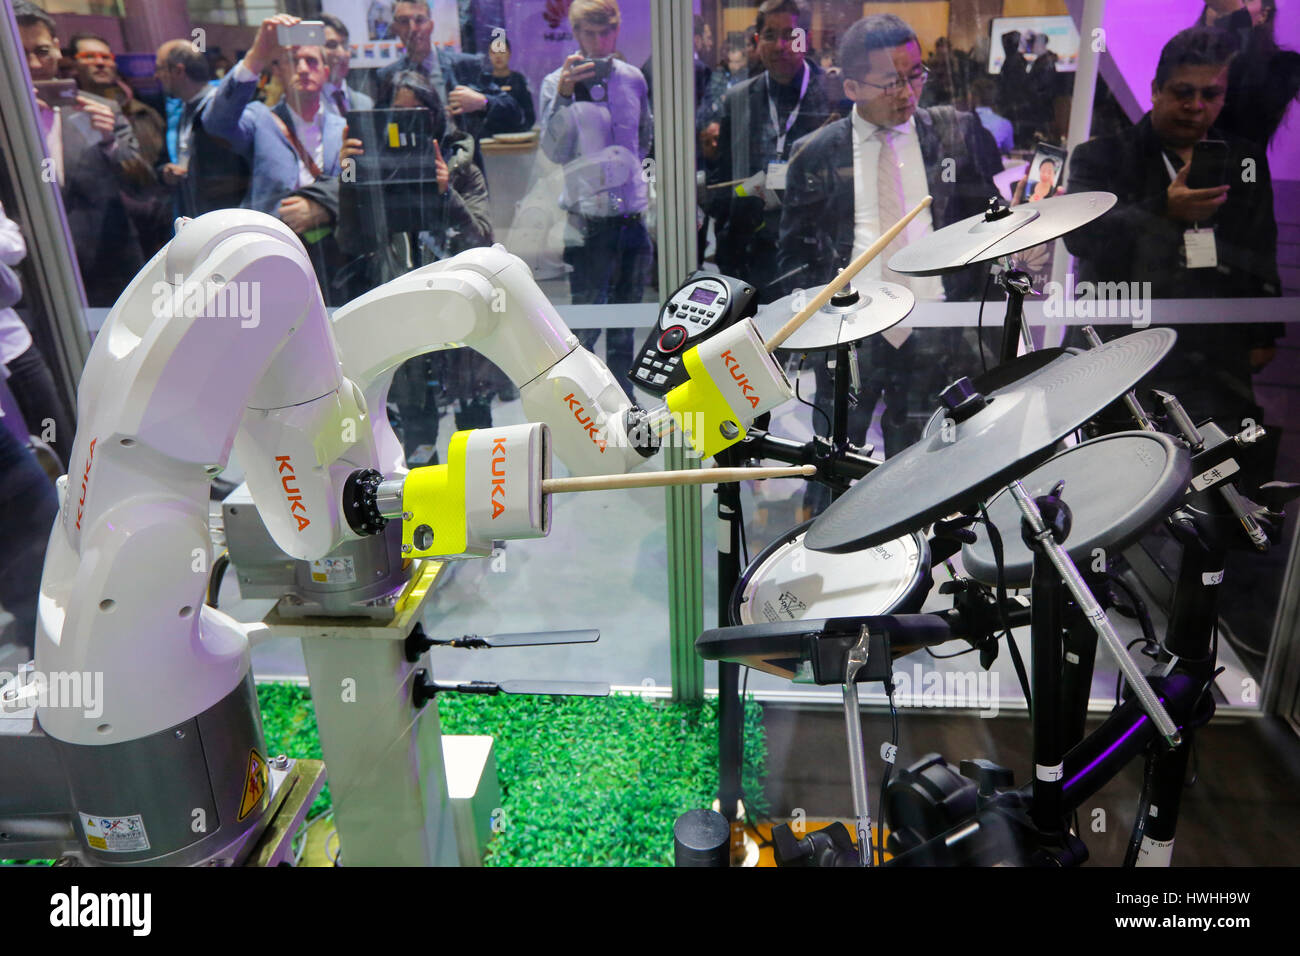 Hannover, Germany, 20th March 2017 - CeBIT digital technology trade fair. Robot arms with drumsticks play on drums on the KUKA robot stand Stock Photo